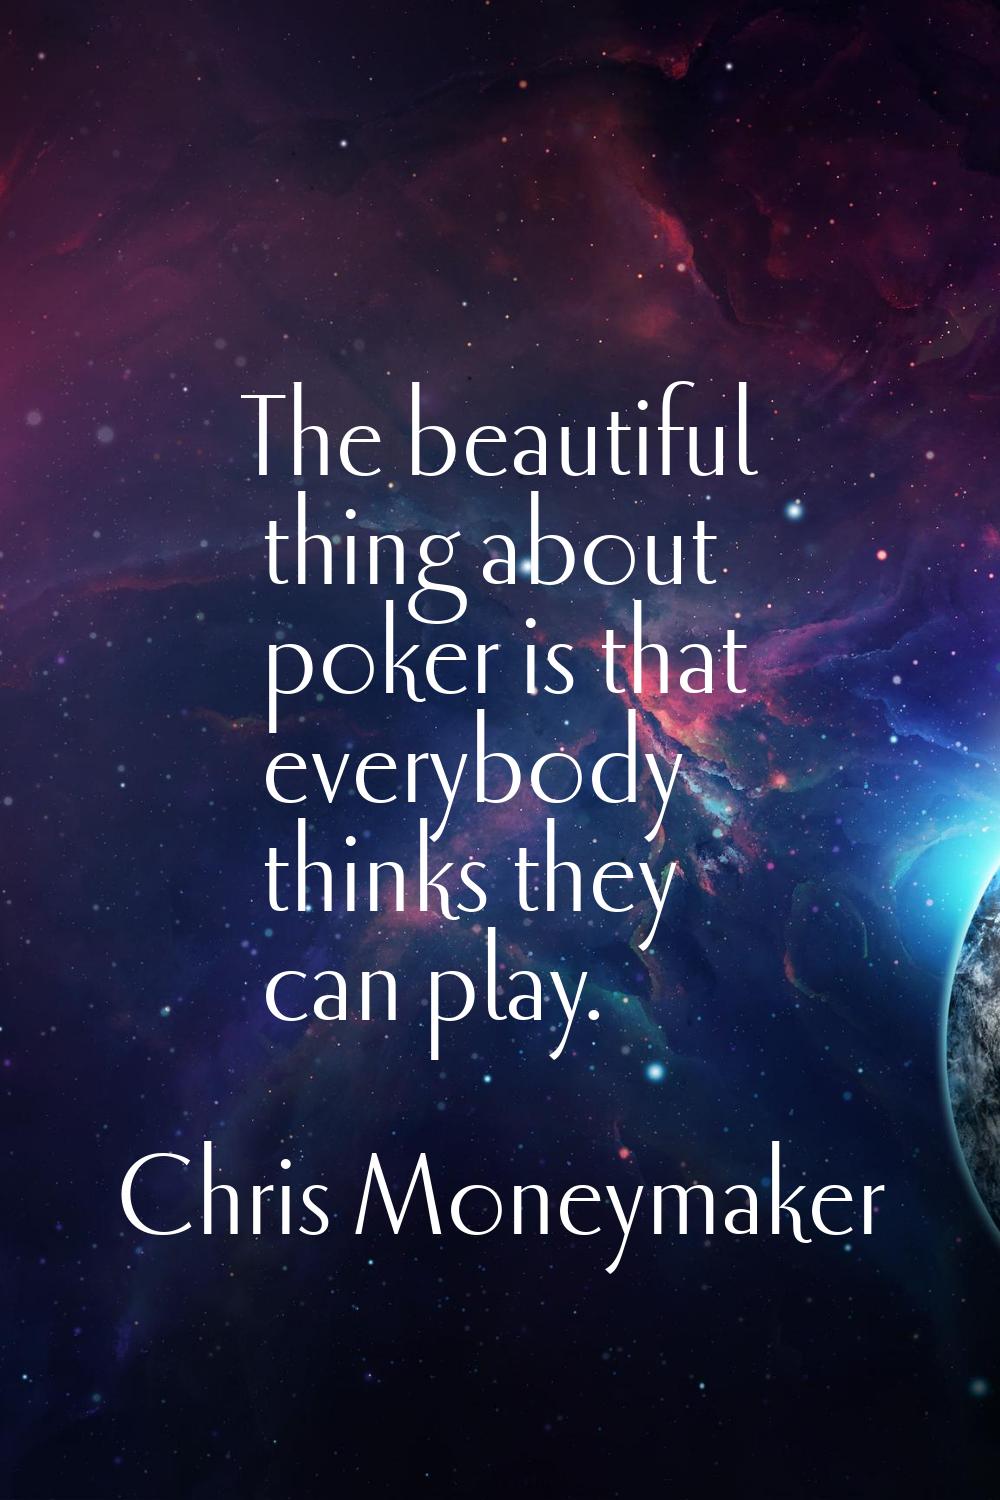 The beautiful thing about poker is that everybody thinks they can play.